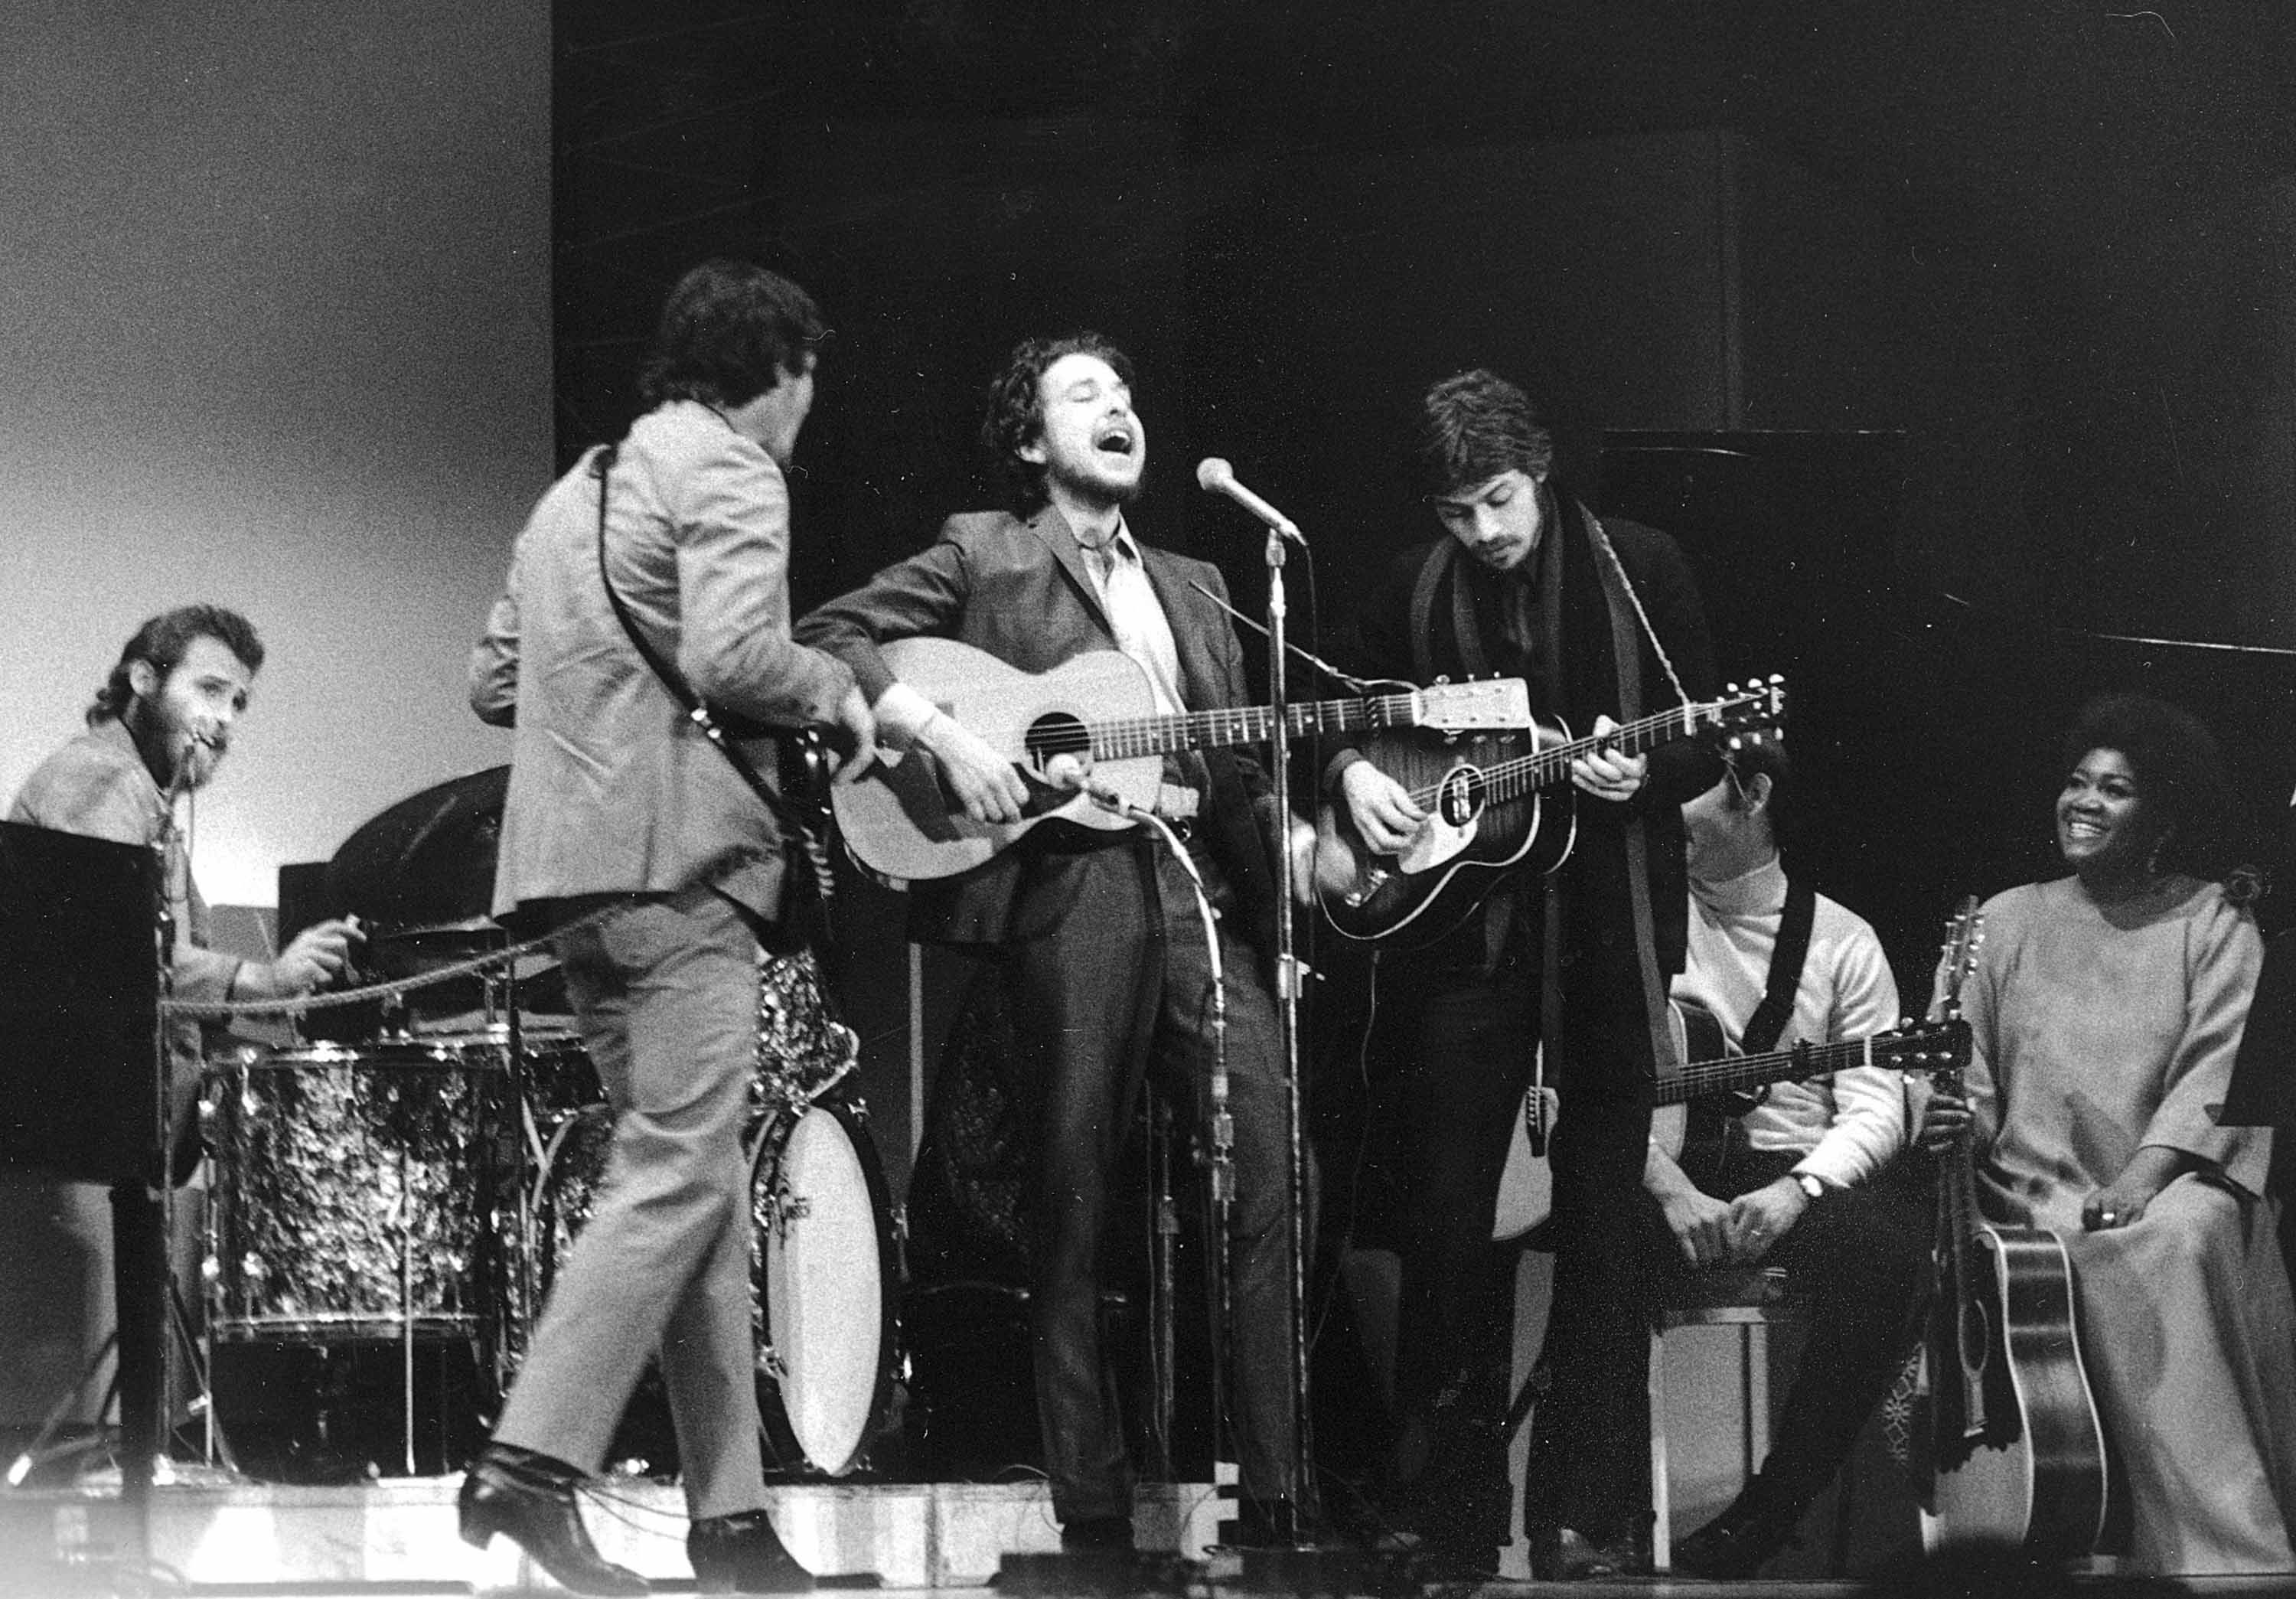 Bob Dylan, center, performs with drummer Levon Helm, left, Rick Danko, second left, and Robbie Robertson of The Band at Carnegie Hall in New York City on Jan. 20, 1968. The concert was part of a benefit tribute to the late folk singer-songwriter Woody Guthrie (AP Photo).